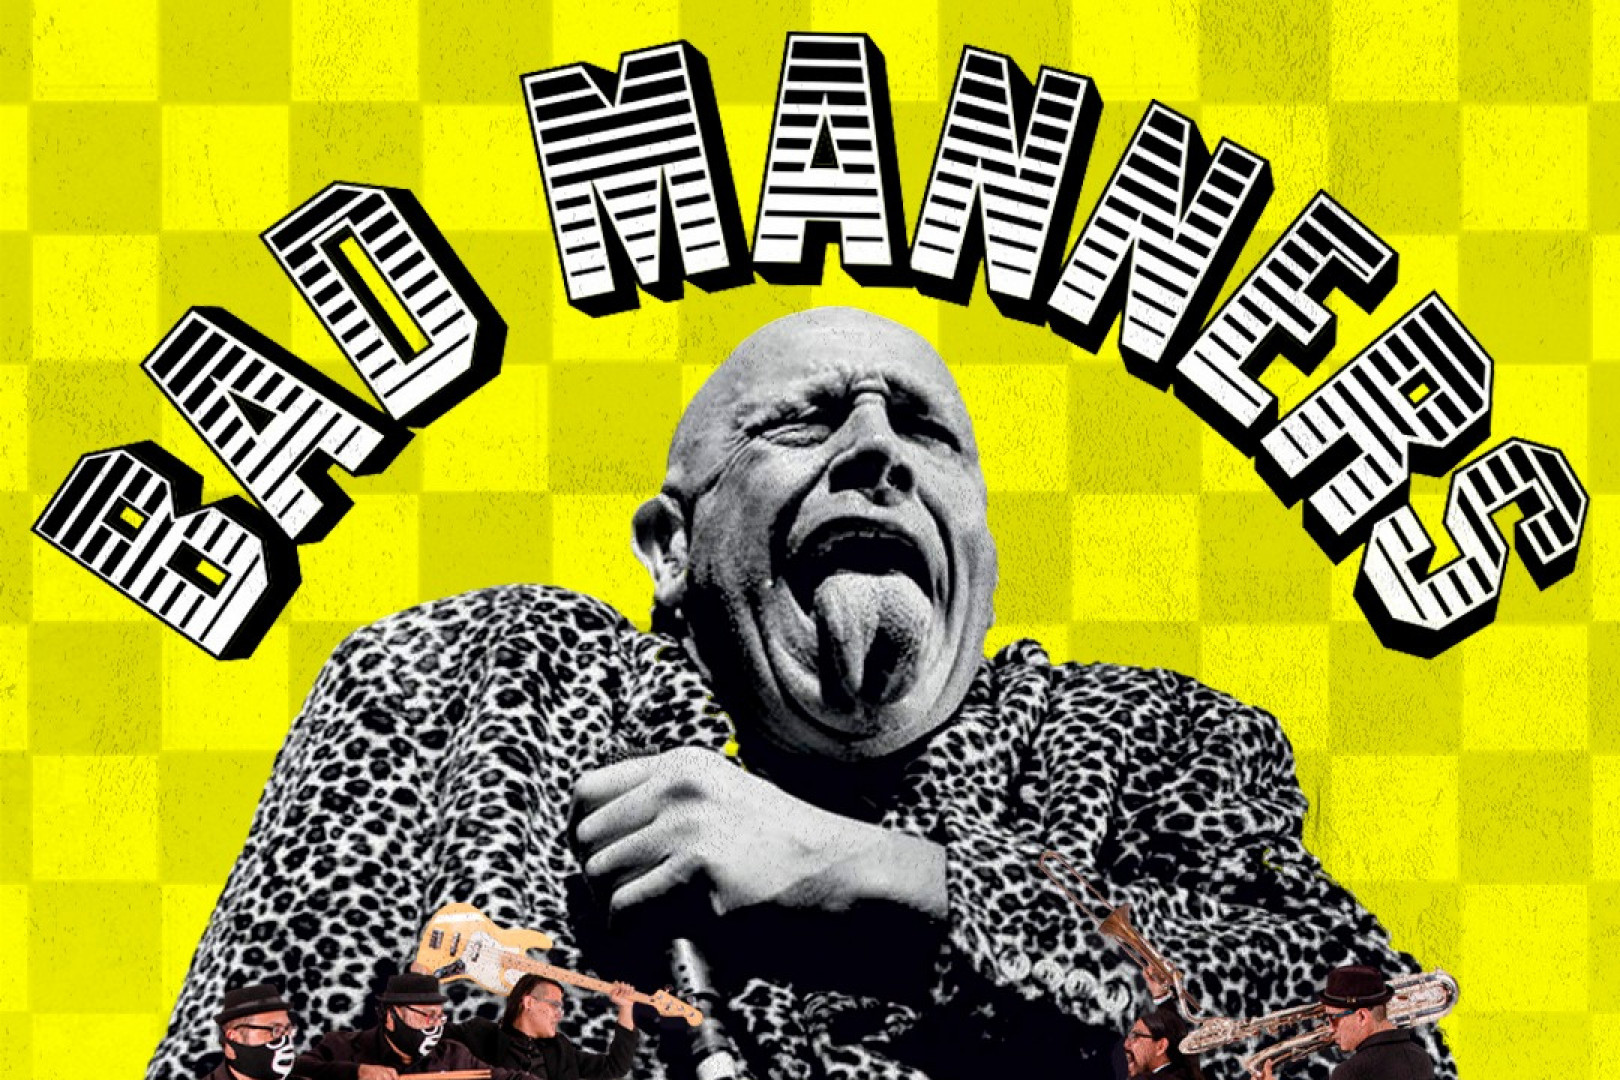 Bad Manners play Philly this Wednesday!!!